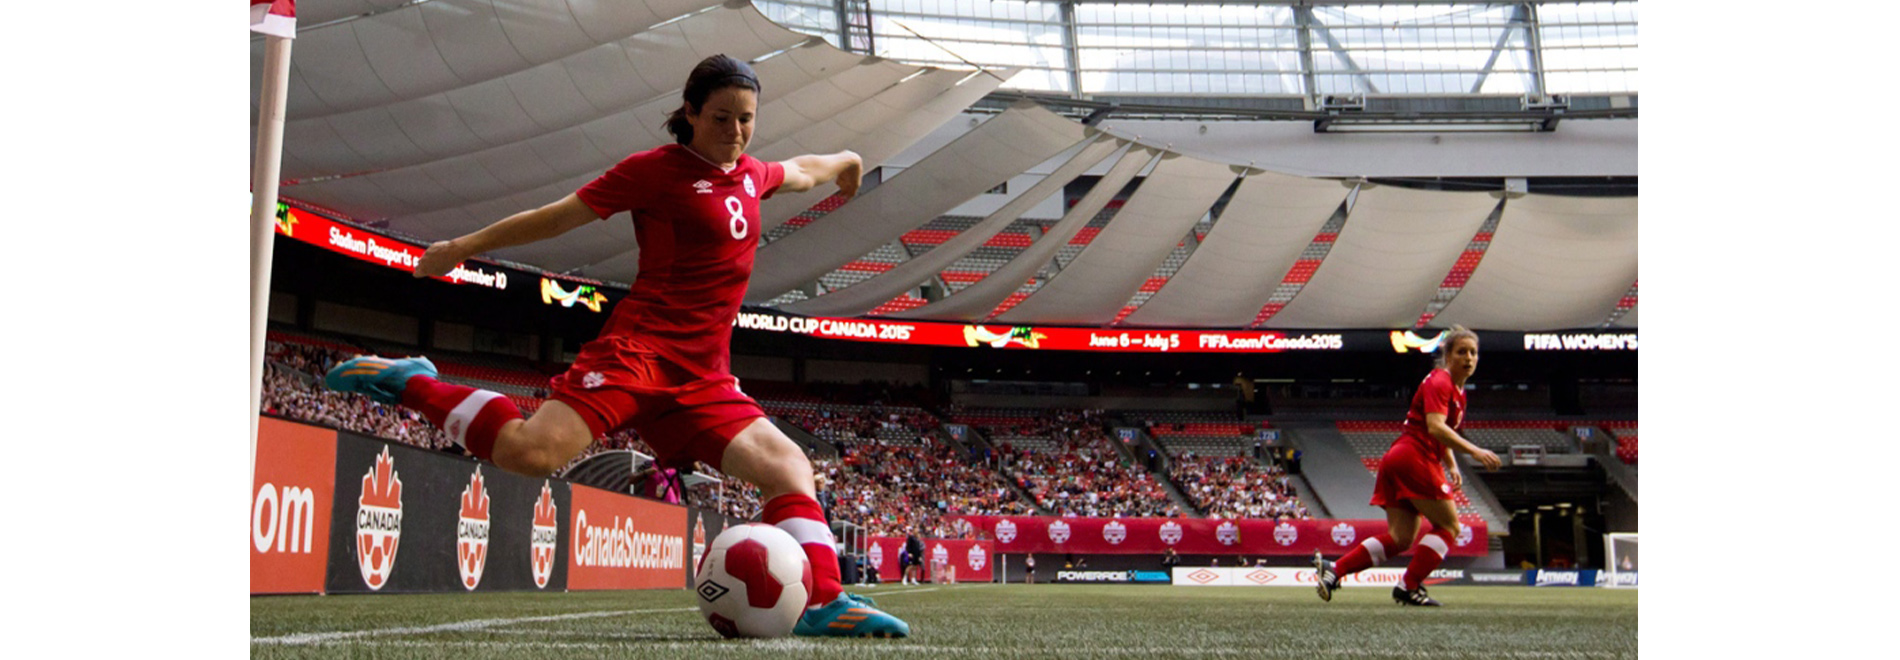 Canadian Women's professional soccer league to launch in 2025